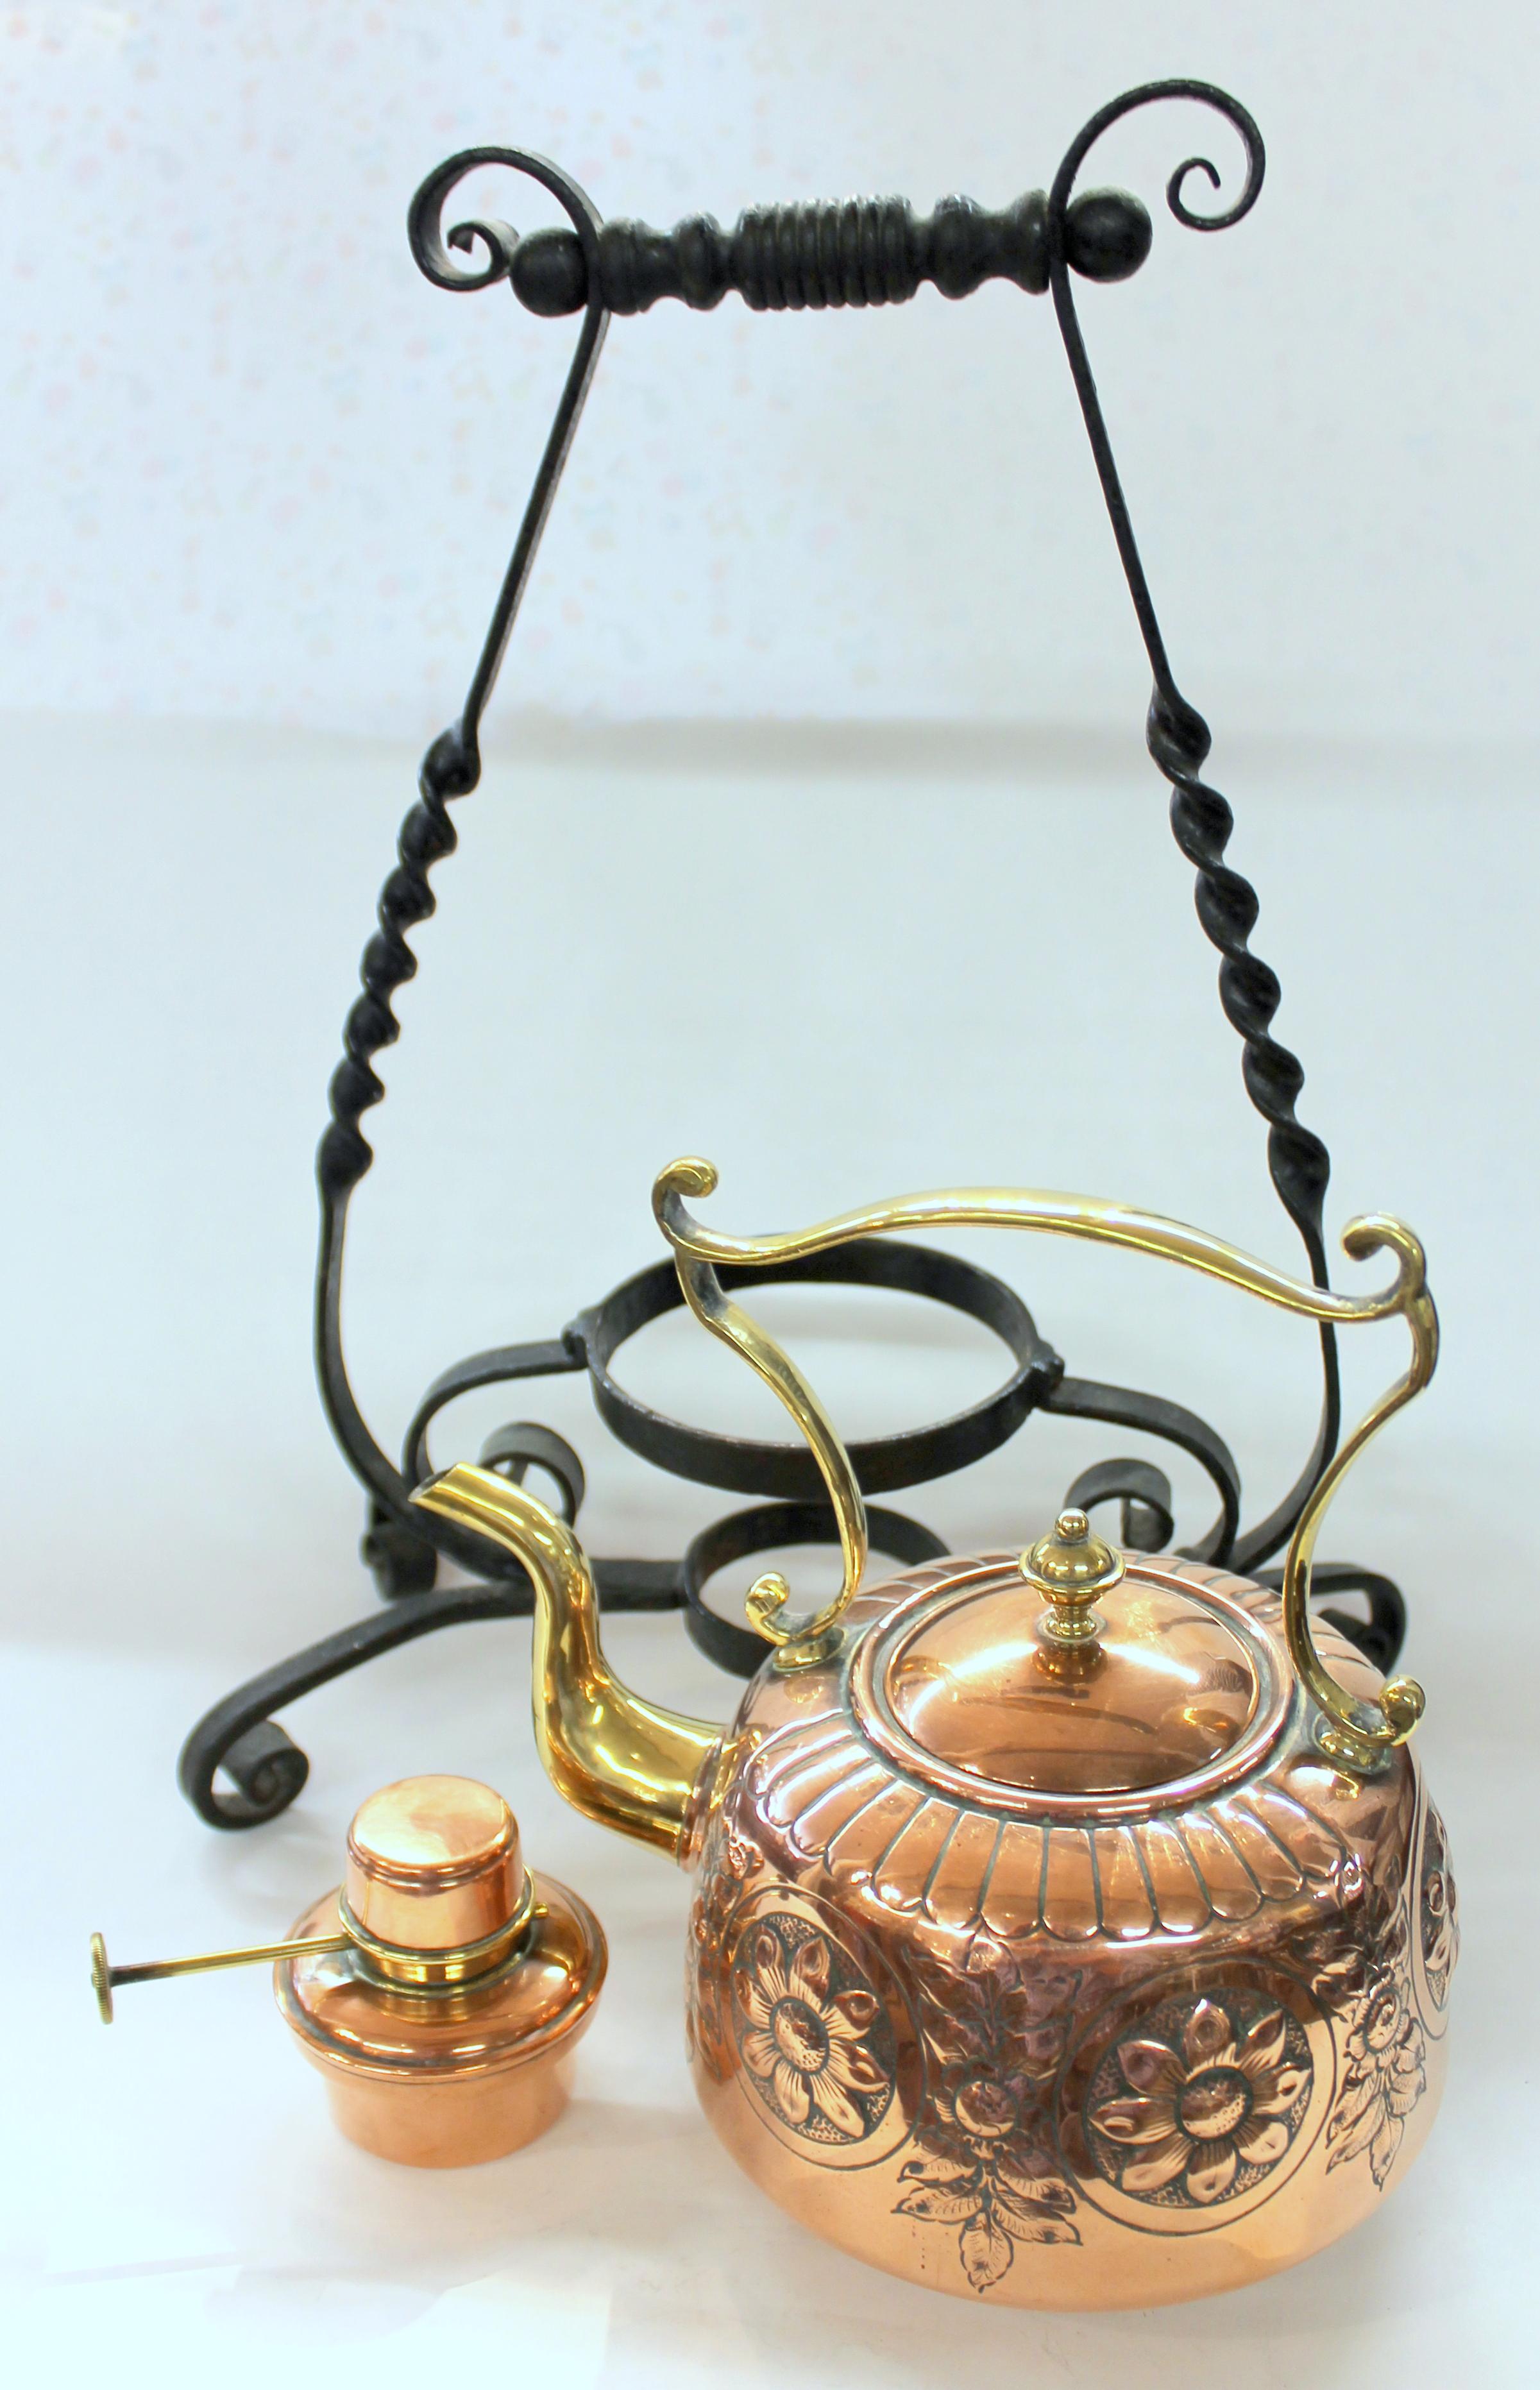 Antique English Hand Chased Copper and Brass Kettle on Wrought Iron Stand 1